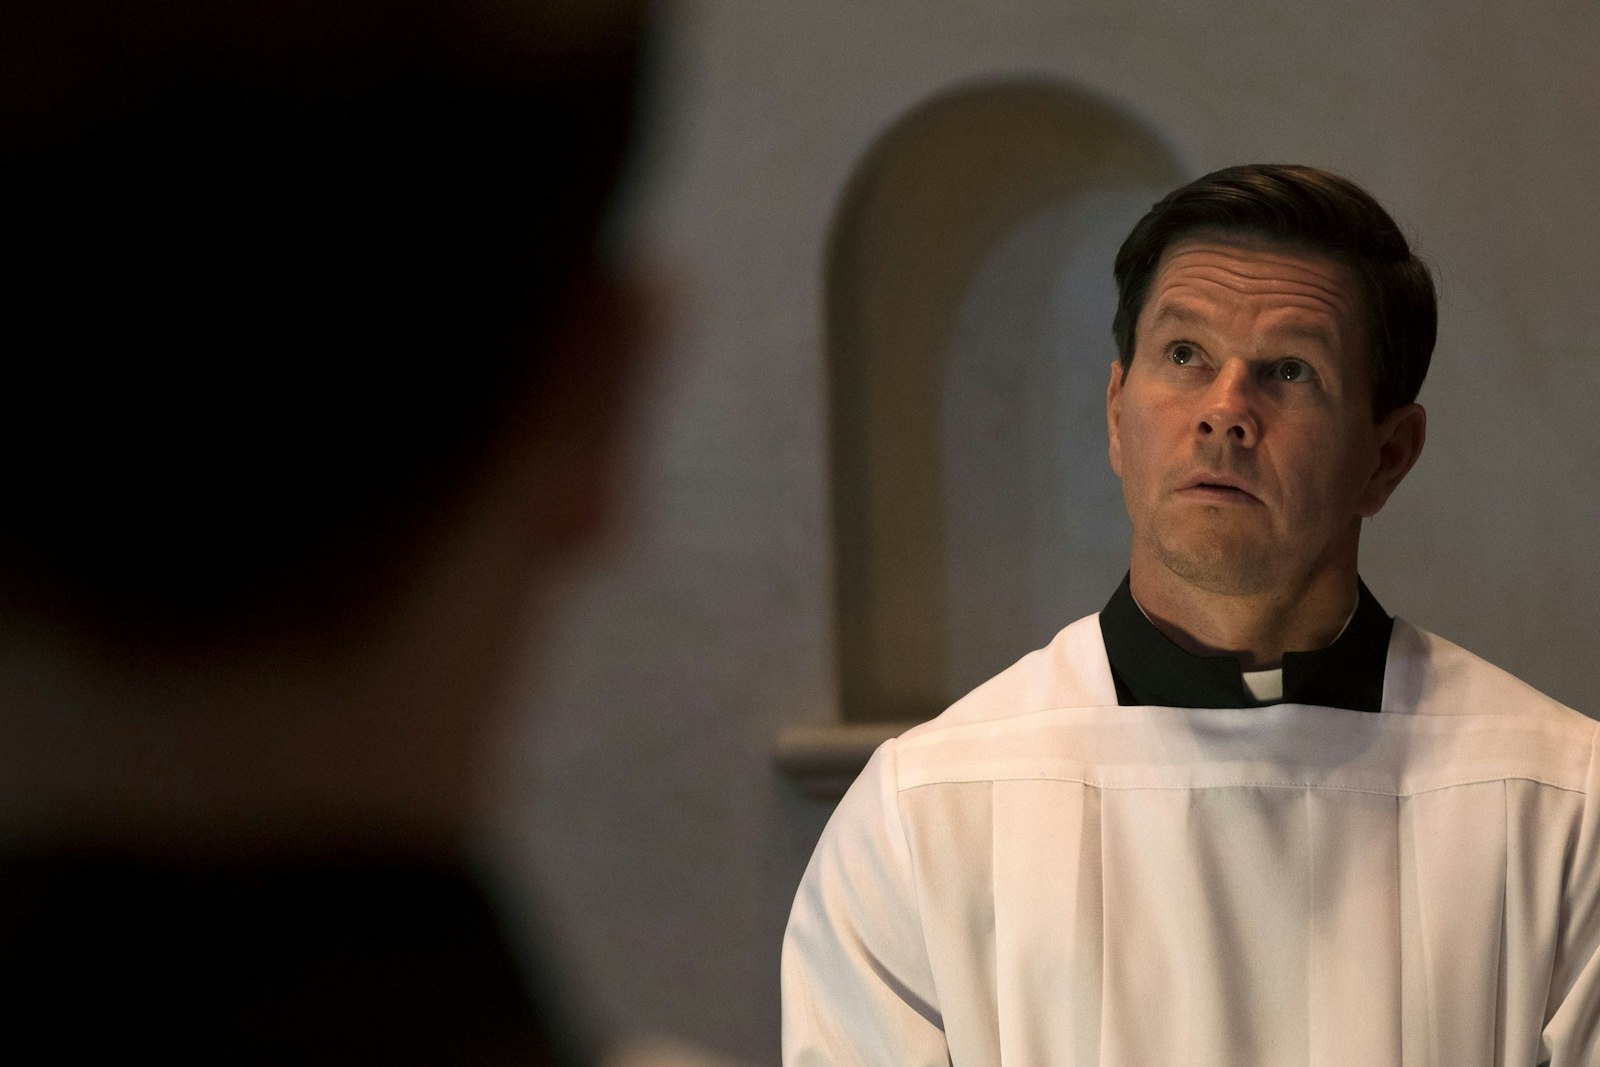 Even as a priest, Wahlberg's character continues to battle with the vices of his prior life, but each time he falls, he resolves to pick himself back up and continue along the road of grace God set for him.